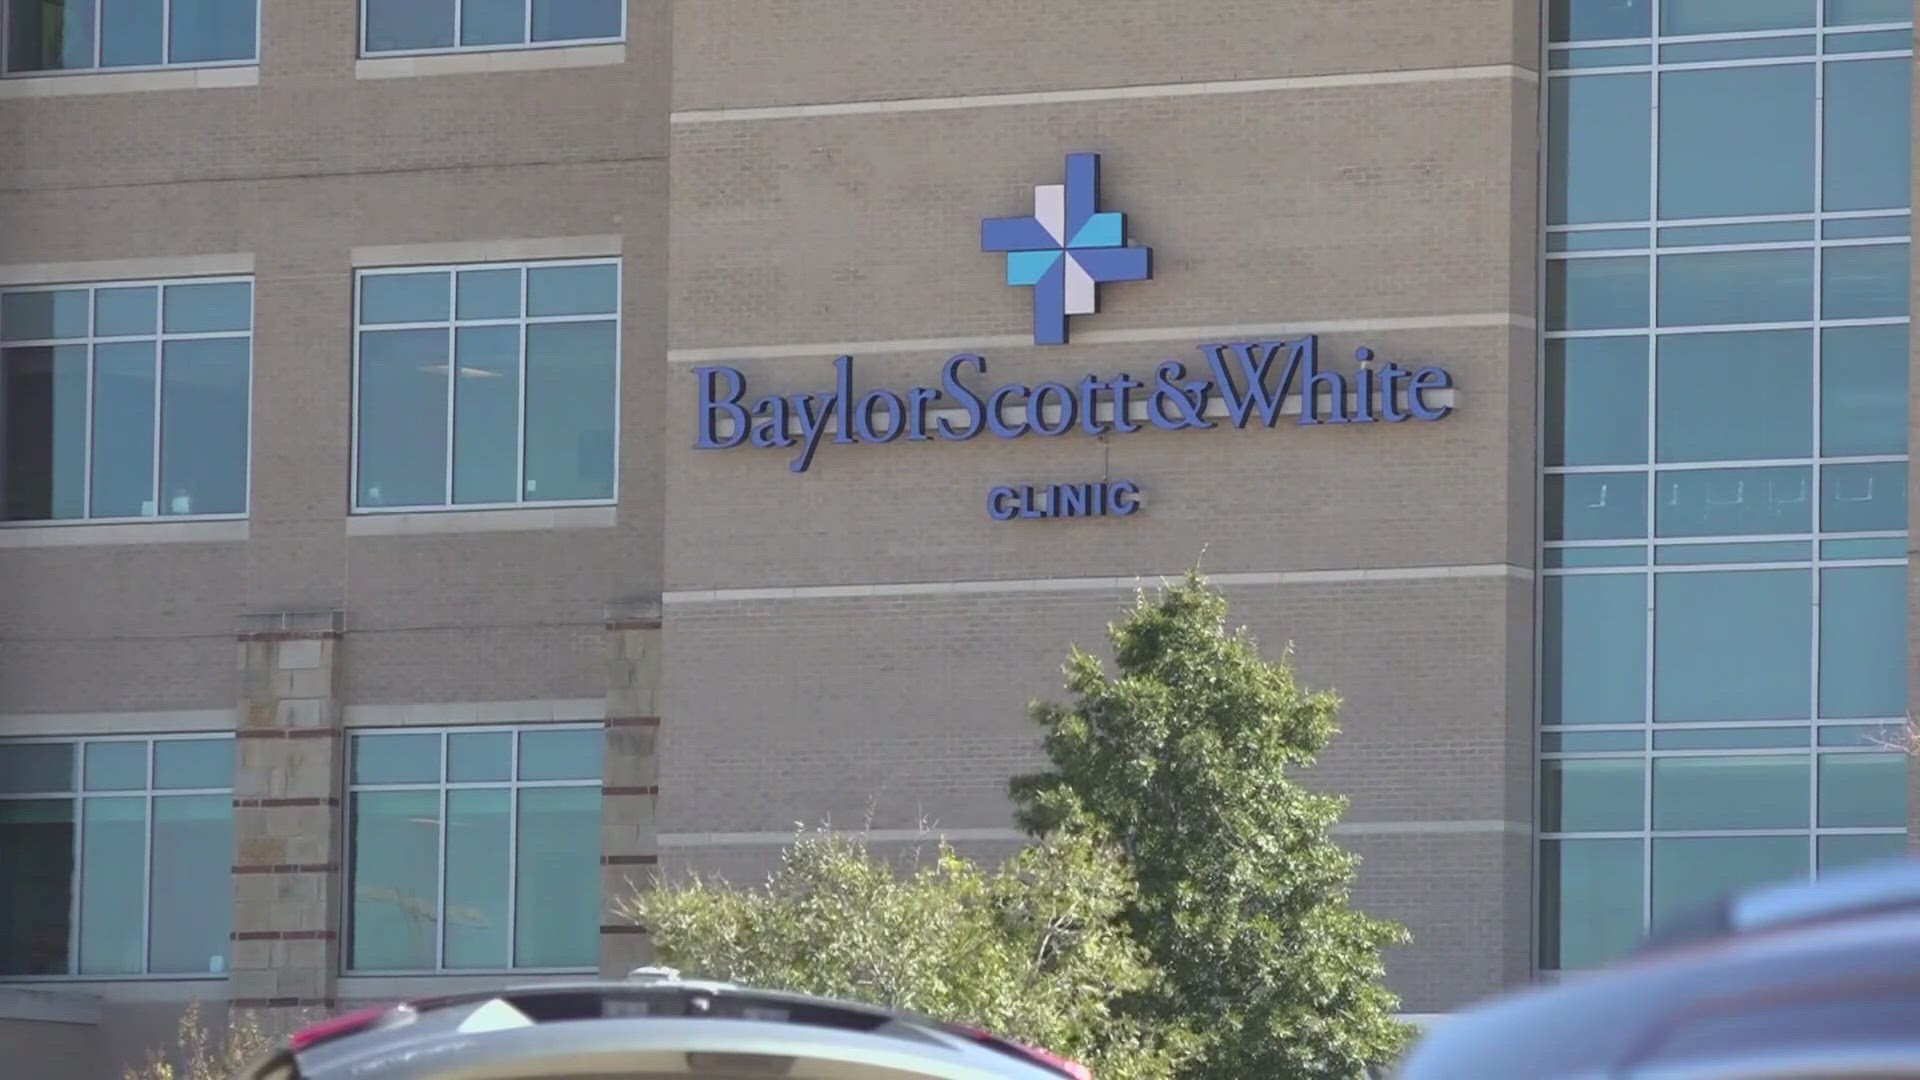 No, Baylor Scott & White Health is currently negotiating a new contract to cover care for patients with Blue Cross and Blue Shield of Texas health insurance.